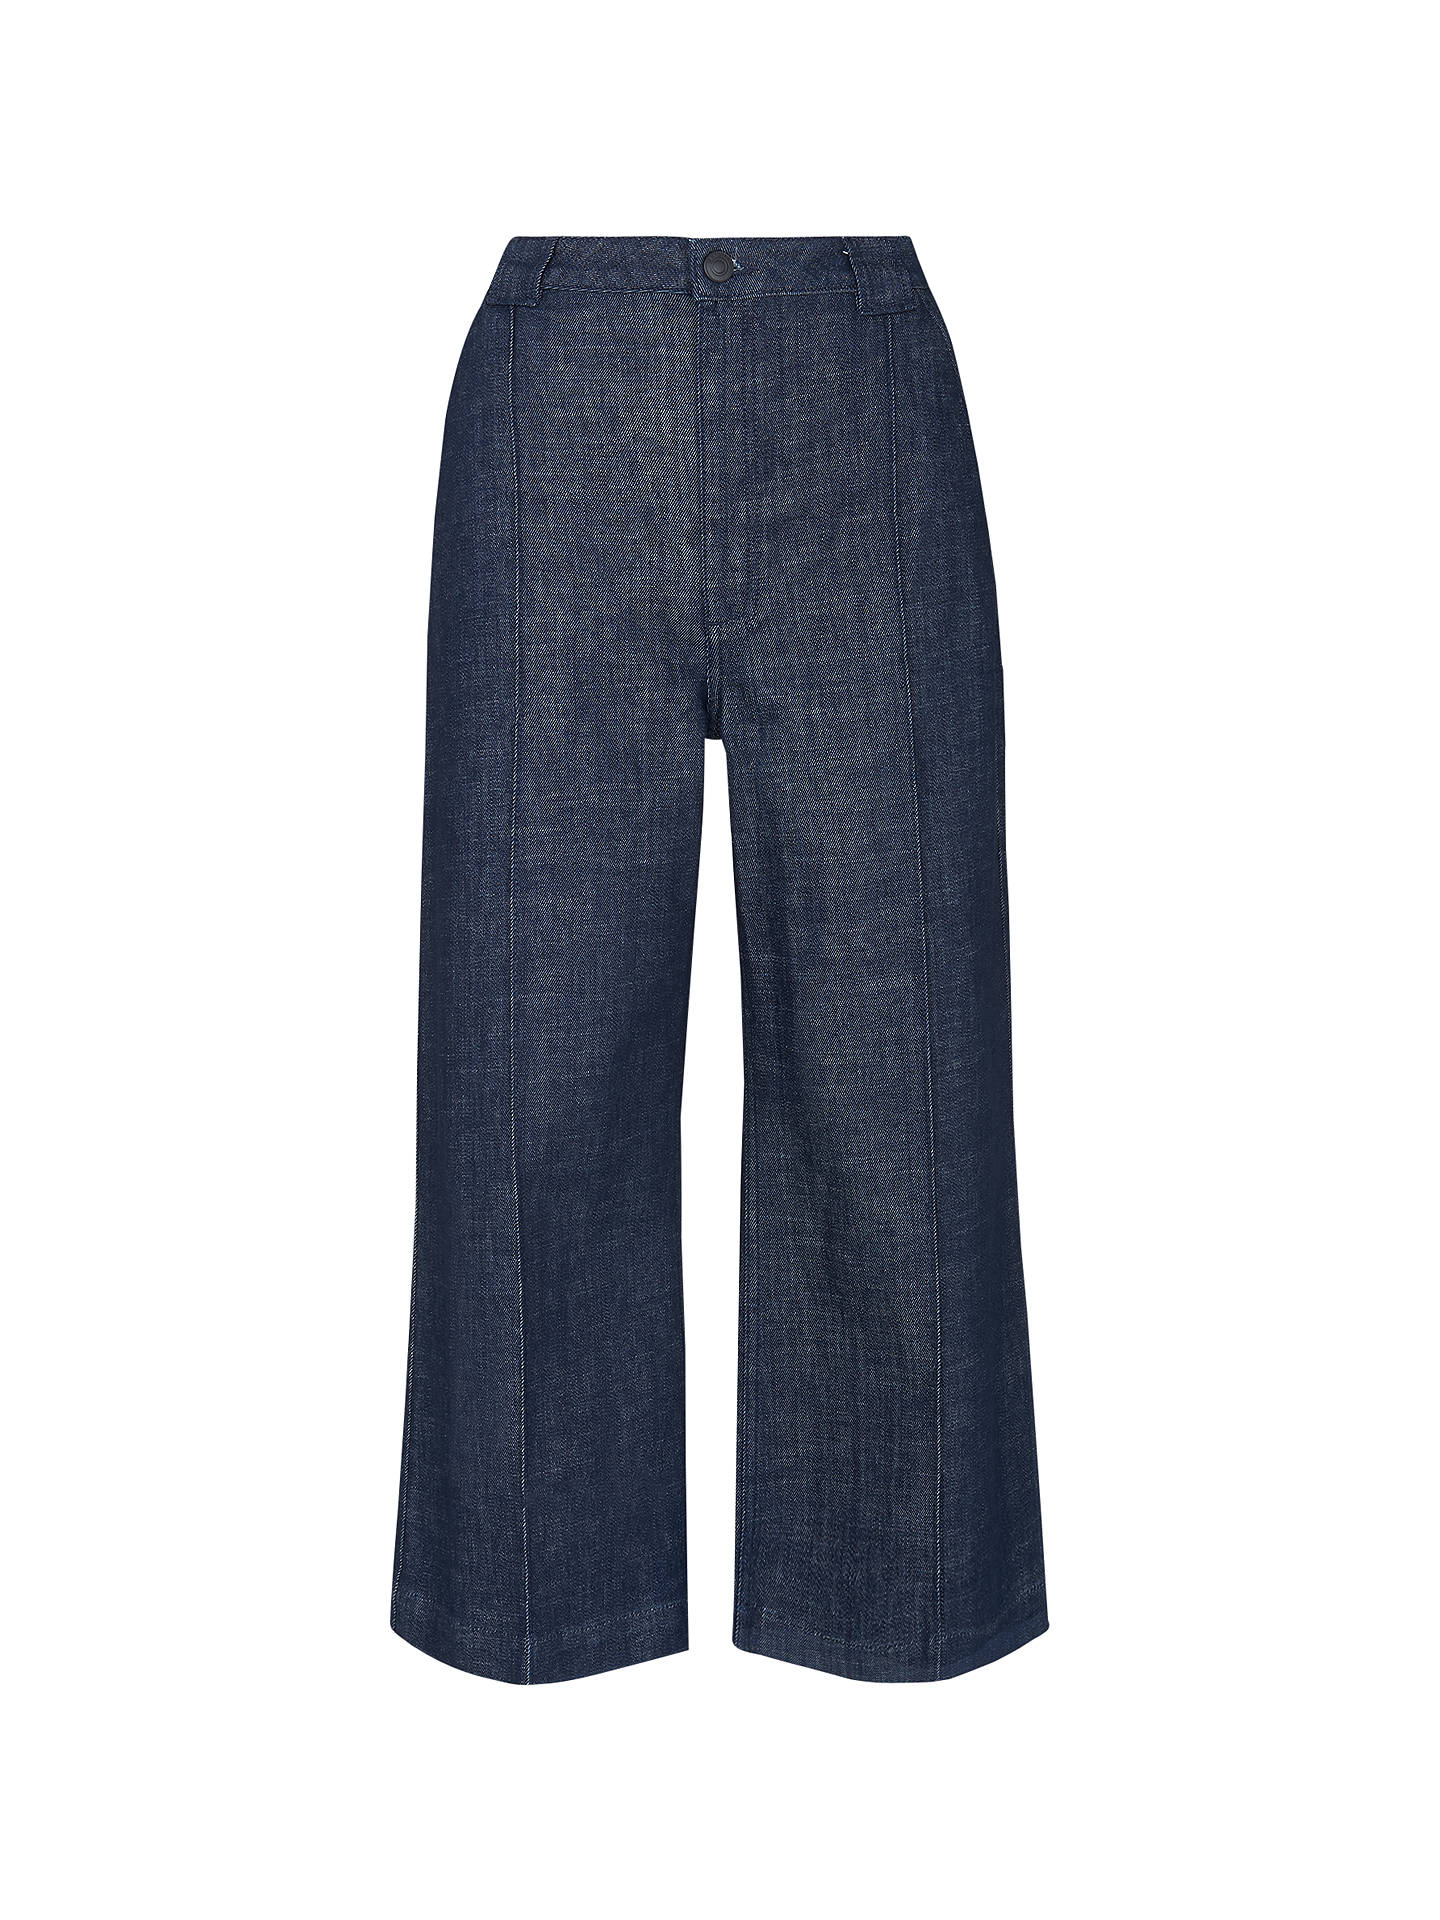 Whistles Lucie Utility Cropped Wide Leg Jeans, Denim at John Lewis ...